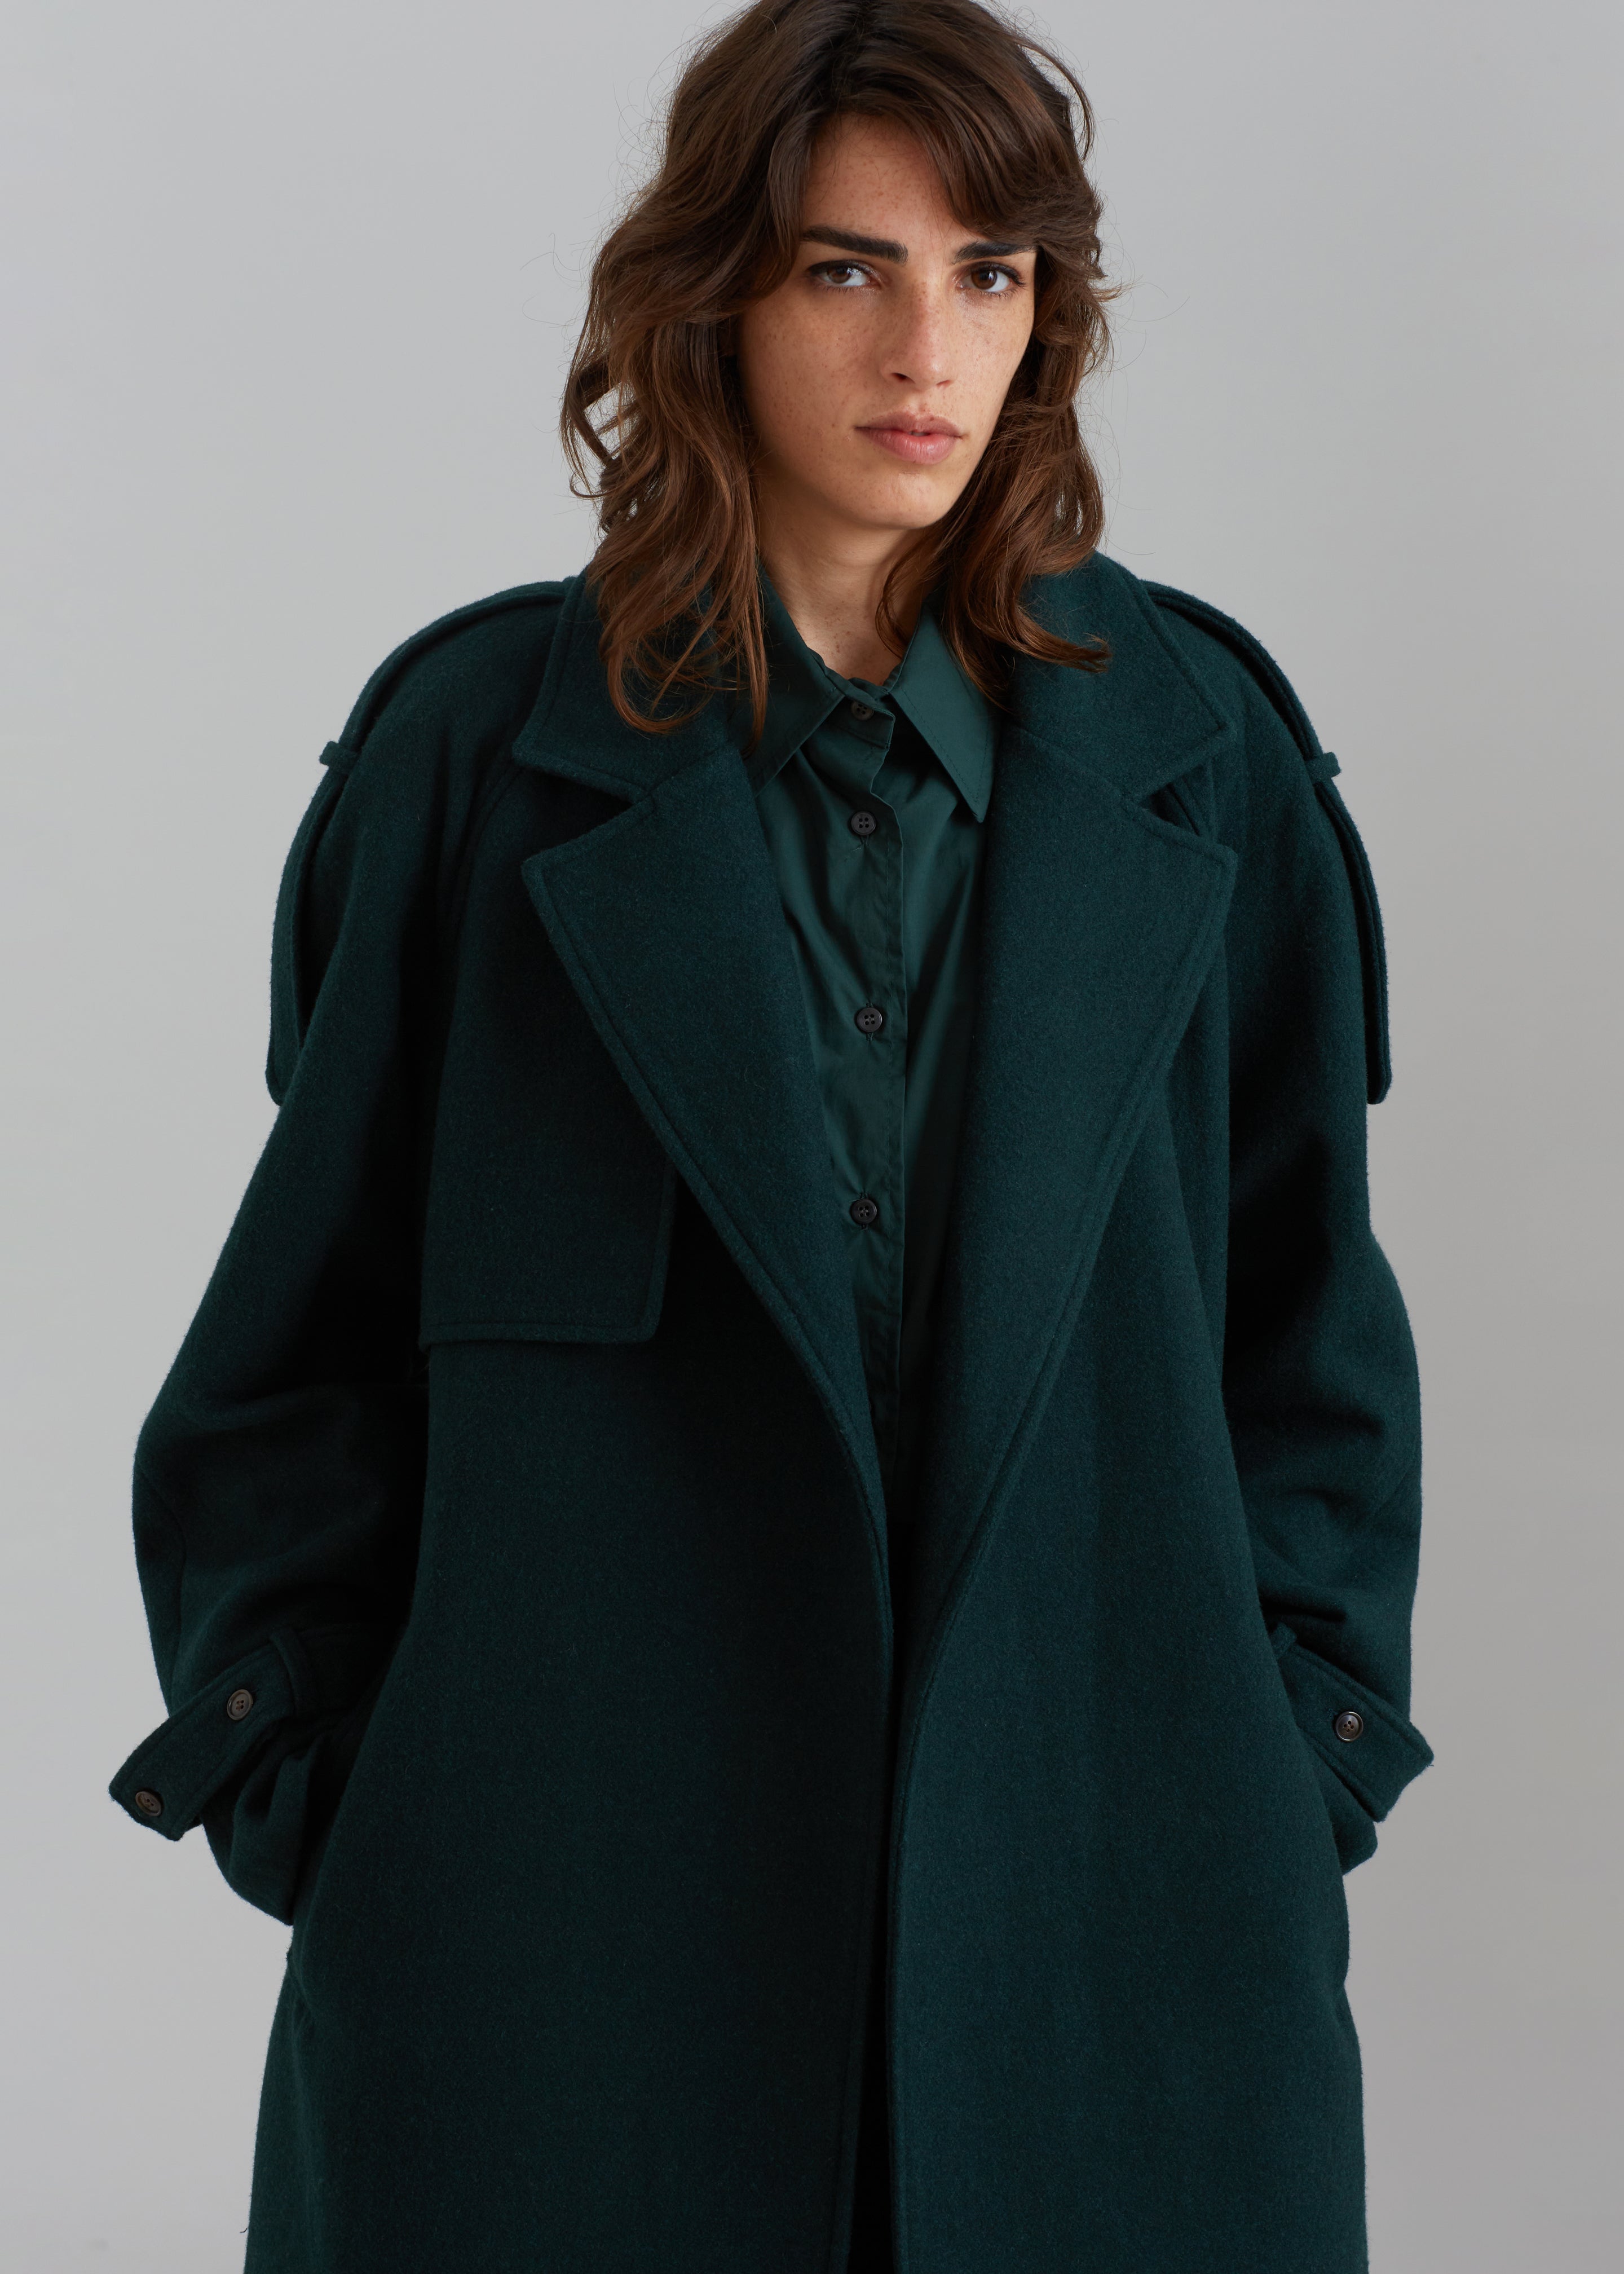 Suzanne Wool Trench Coat - Bottle Green - 3